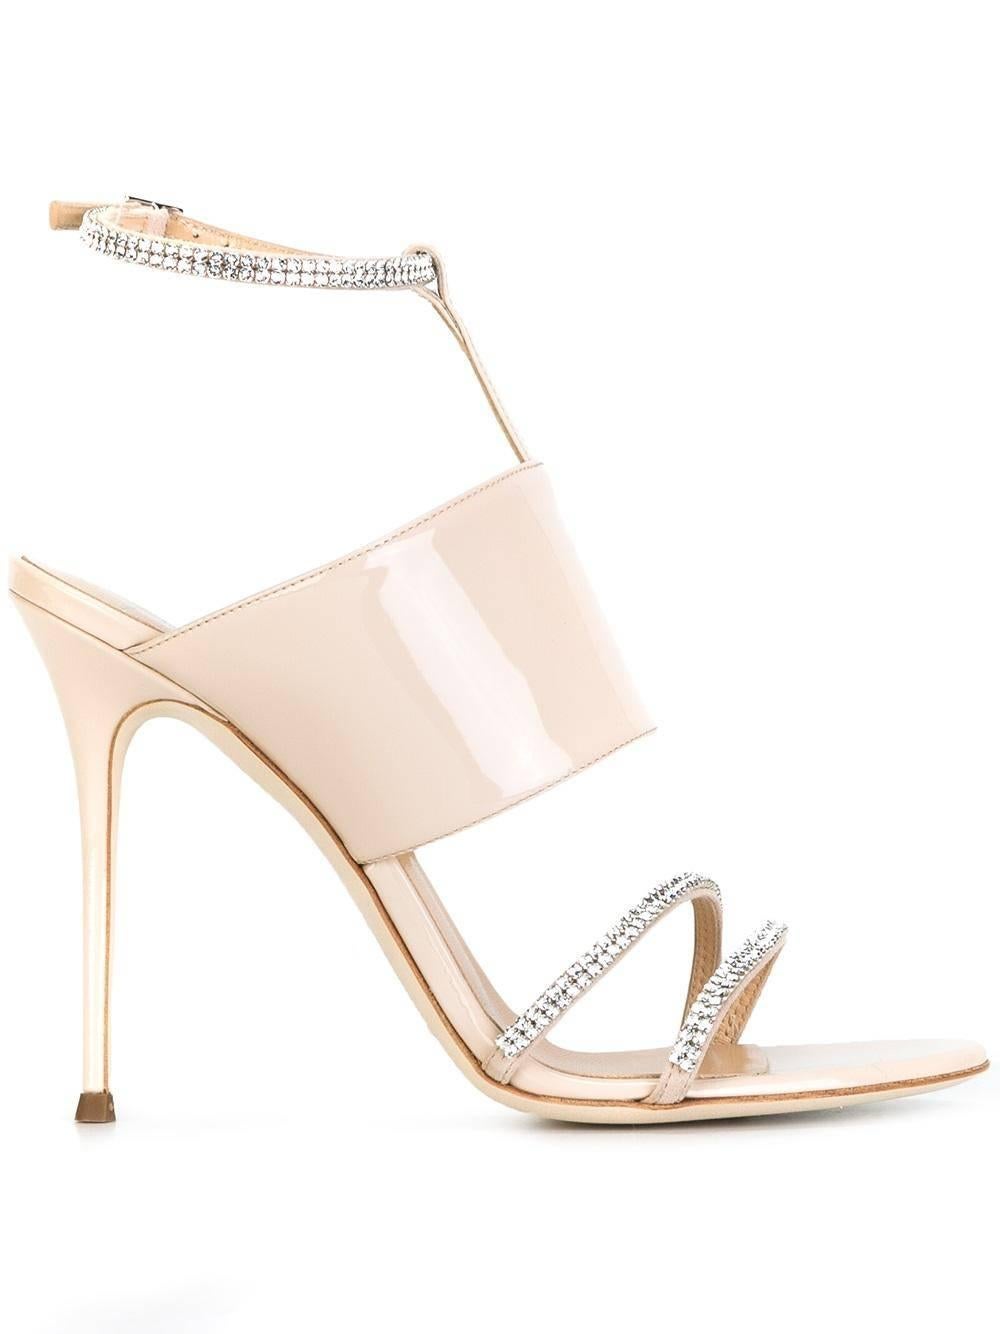 Giuseppe Zanotti New Nude Patent Leather Crystal Evening Sandals Heels in Box In New Condition In Chicago, IL